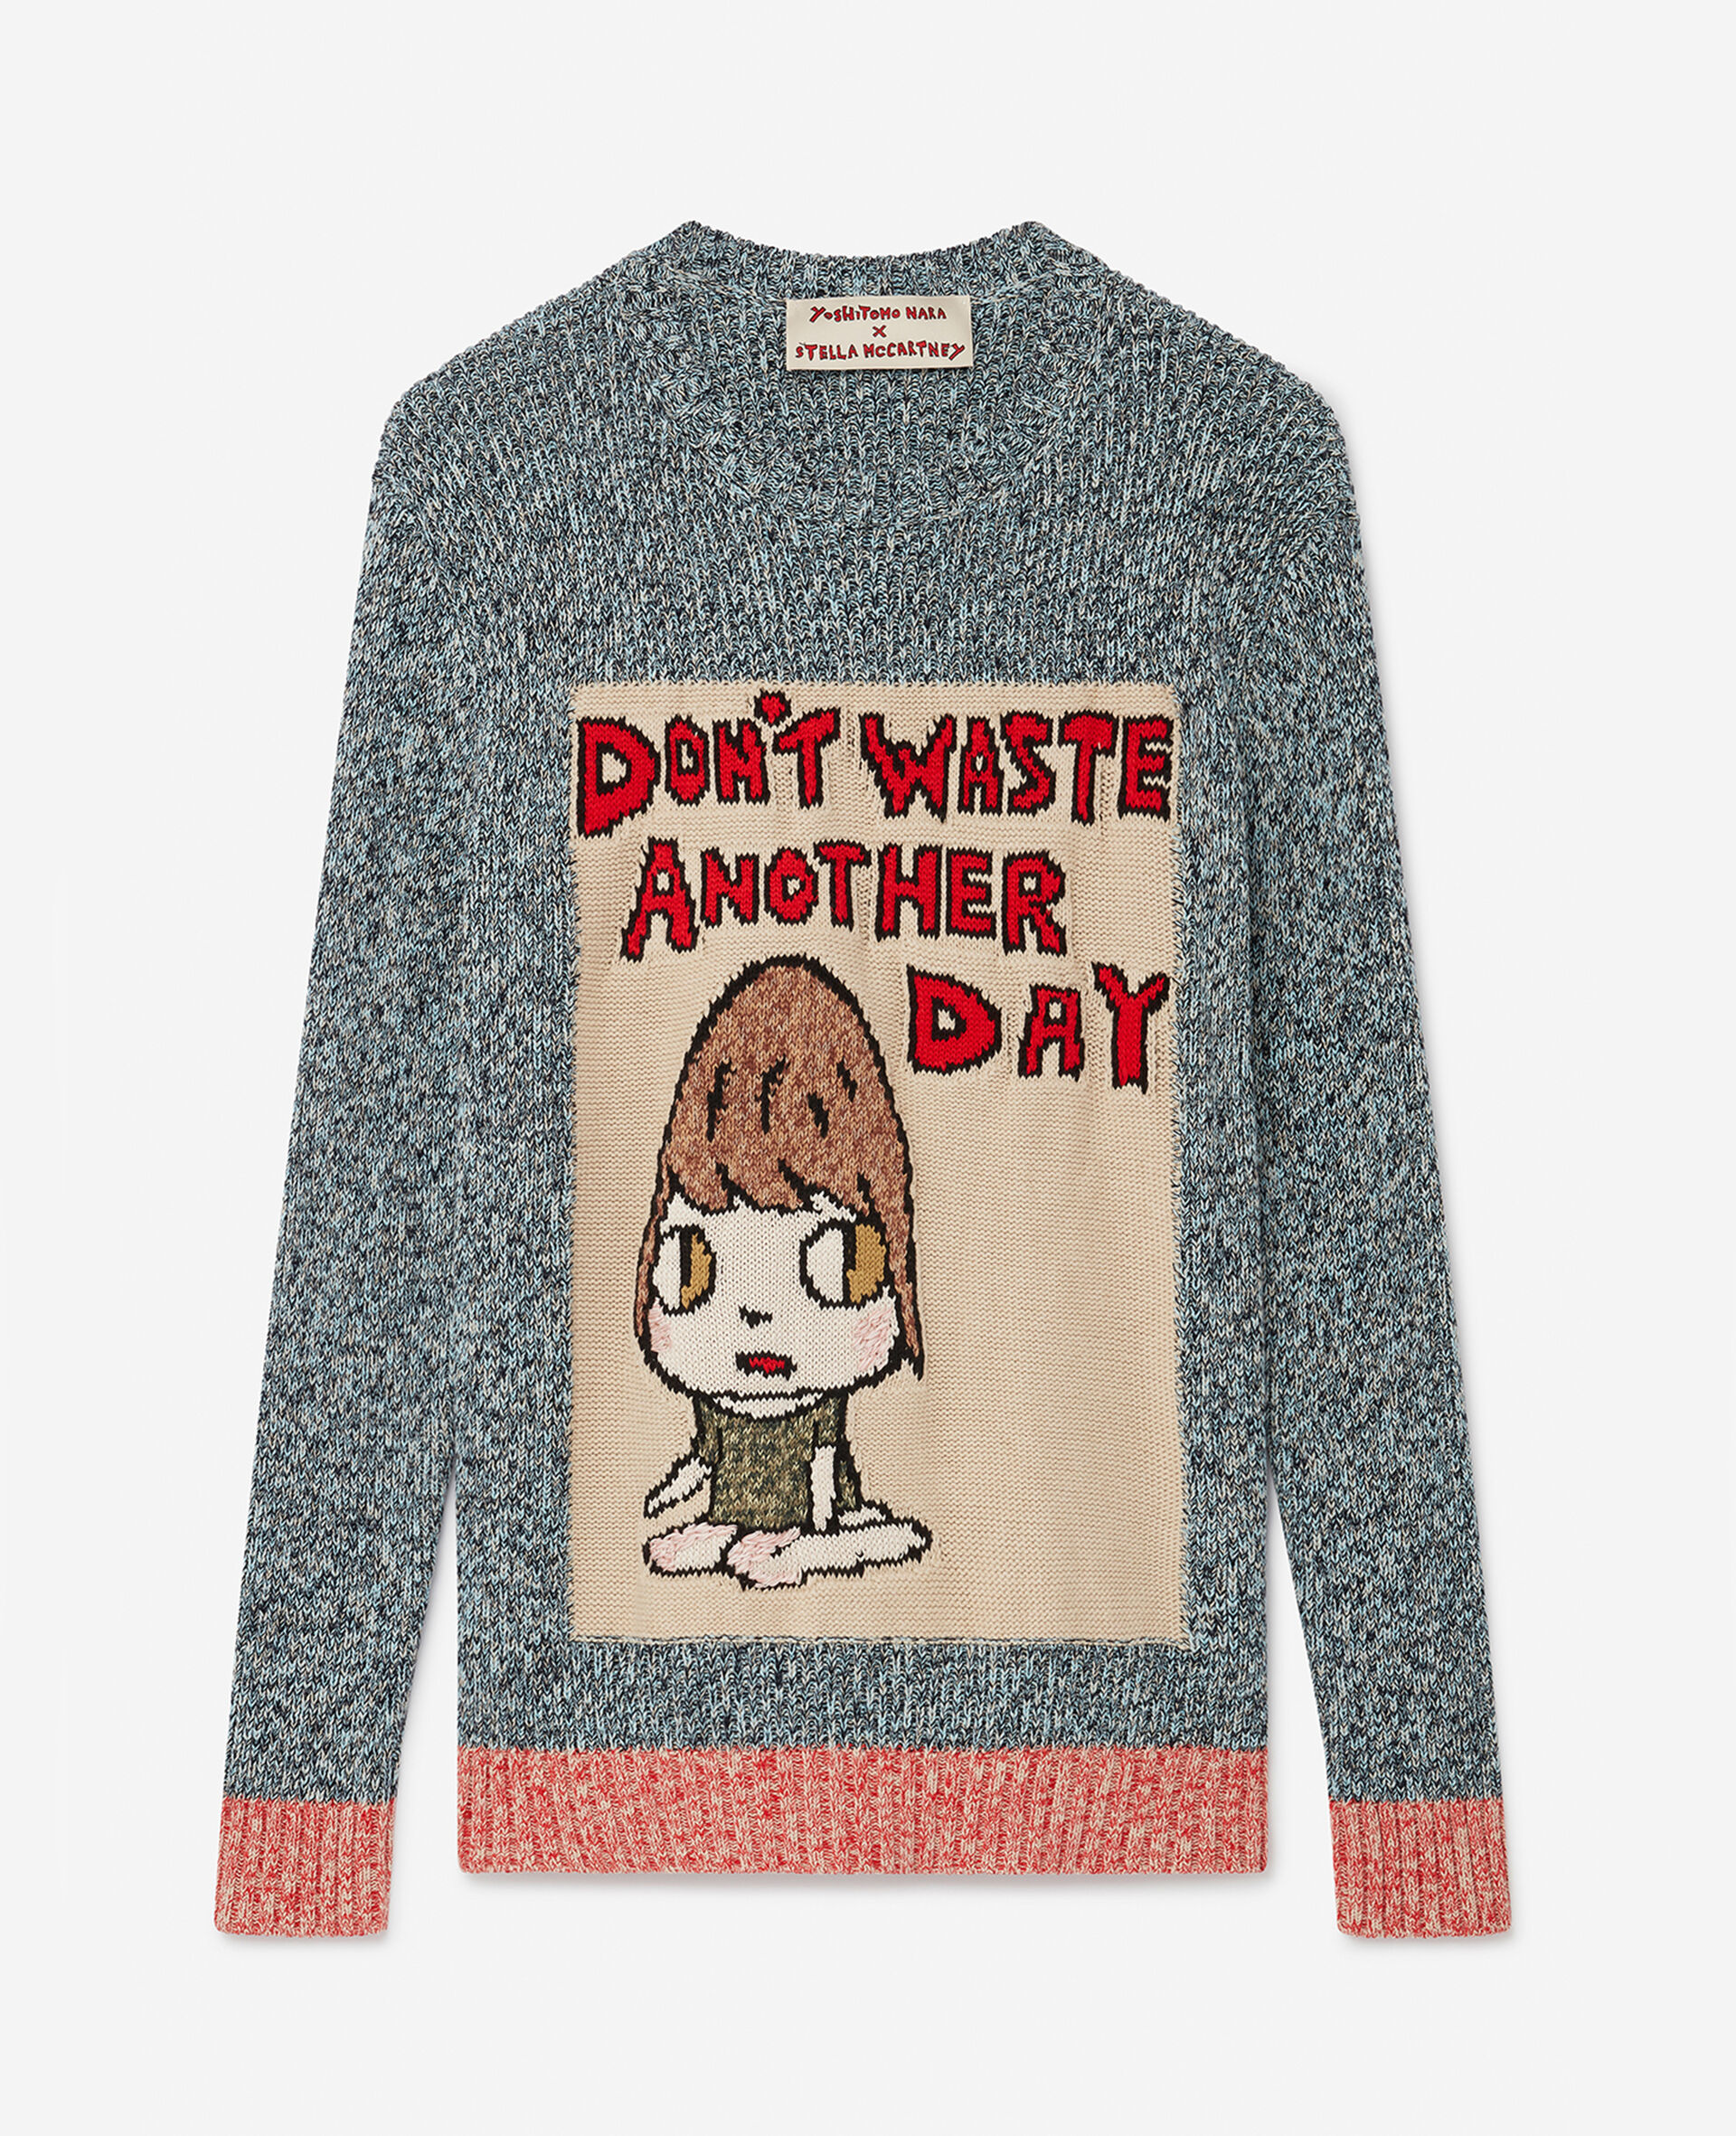 'Don't Waste Another Day' Slogan Cotton Knit Jumper-Blue-large image number 0